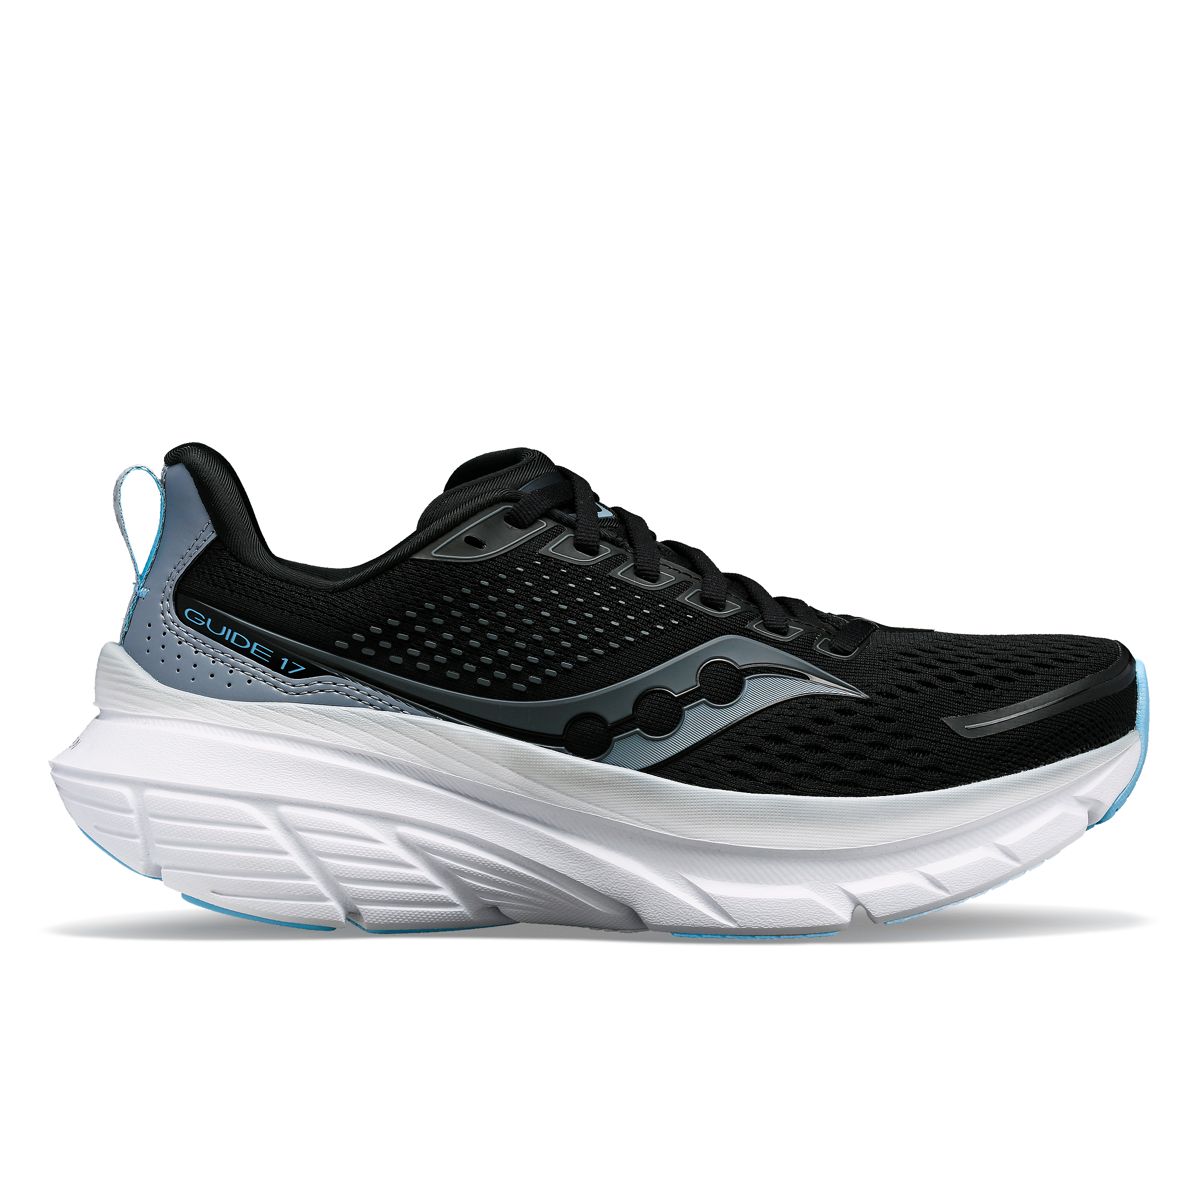 Women's Guide 17 Running Shoes | Saucony